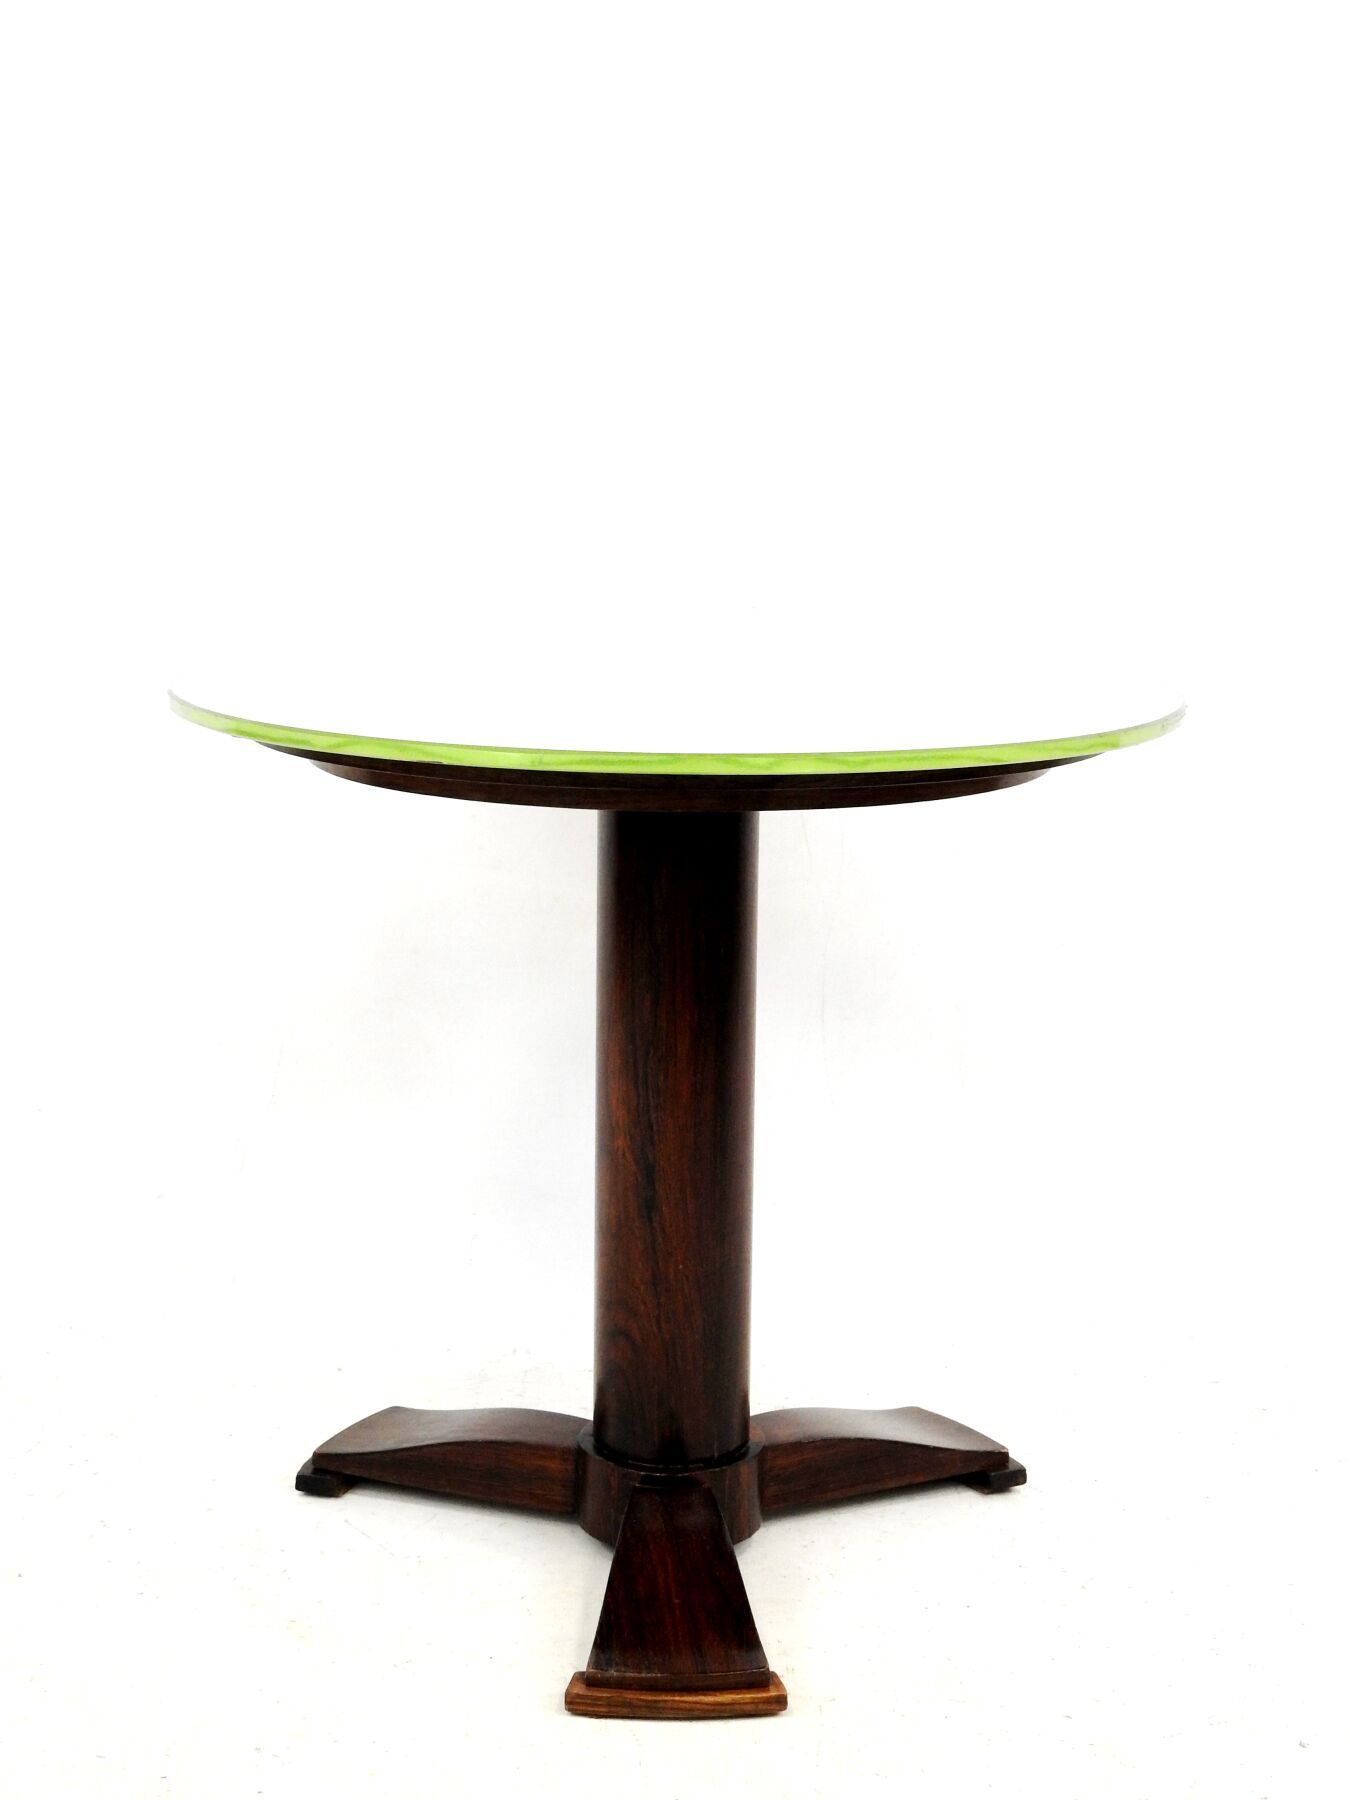 Null Attributed to Jules LELEU (1883-1961).

Liner" pedestal table in rosewood v&hellip;